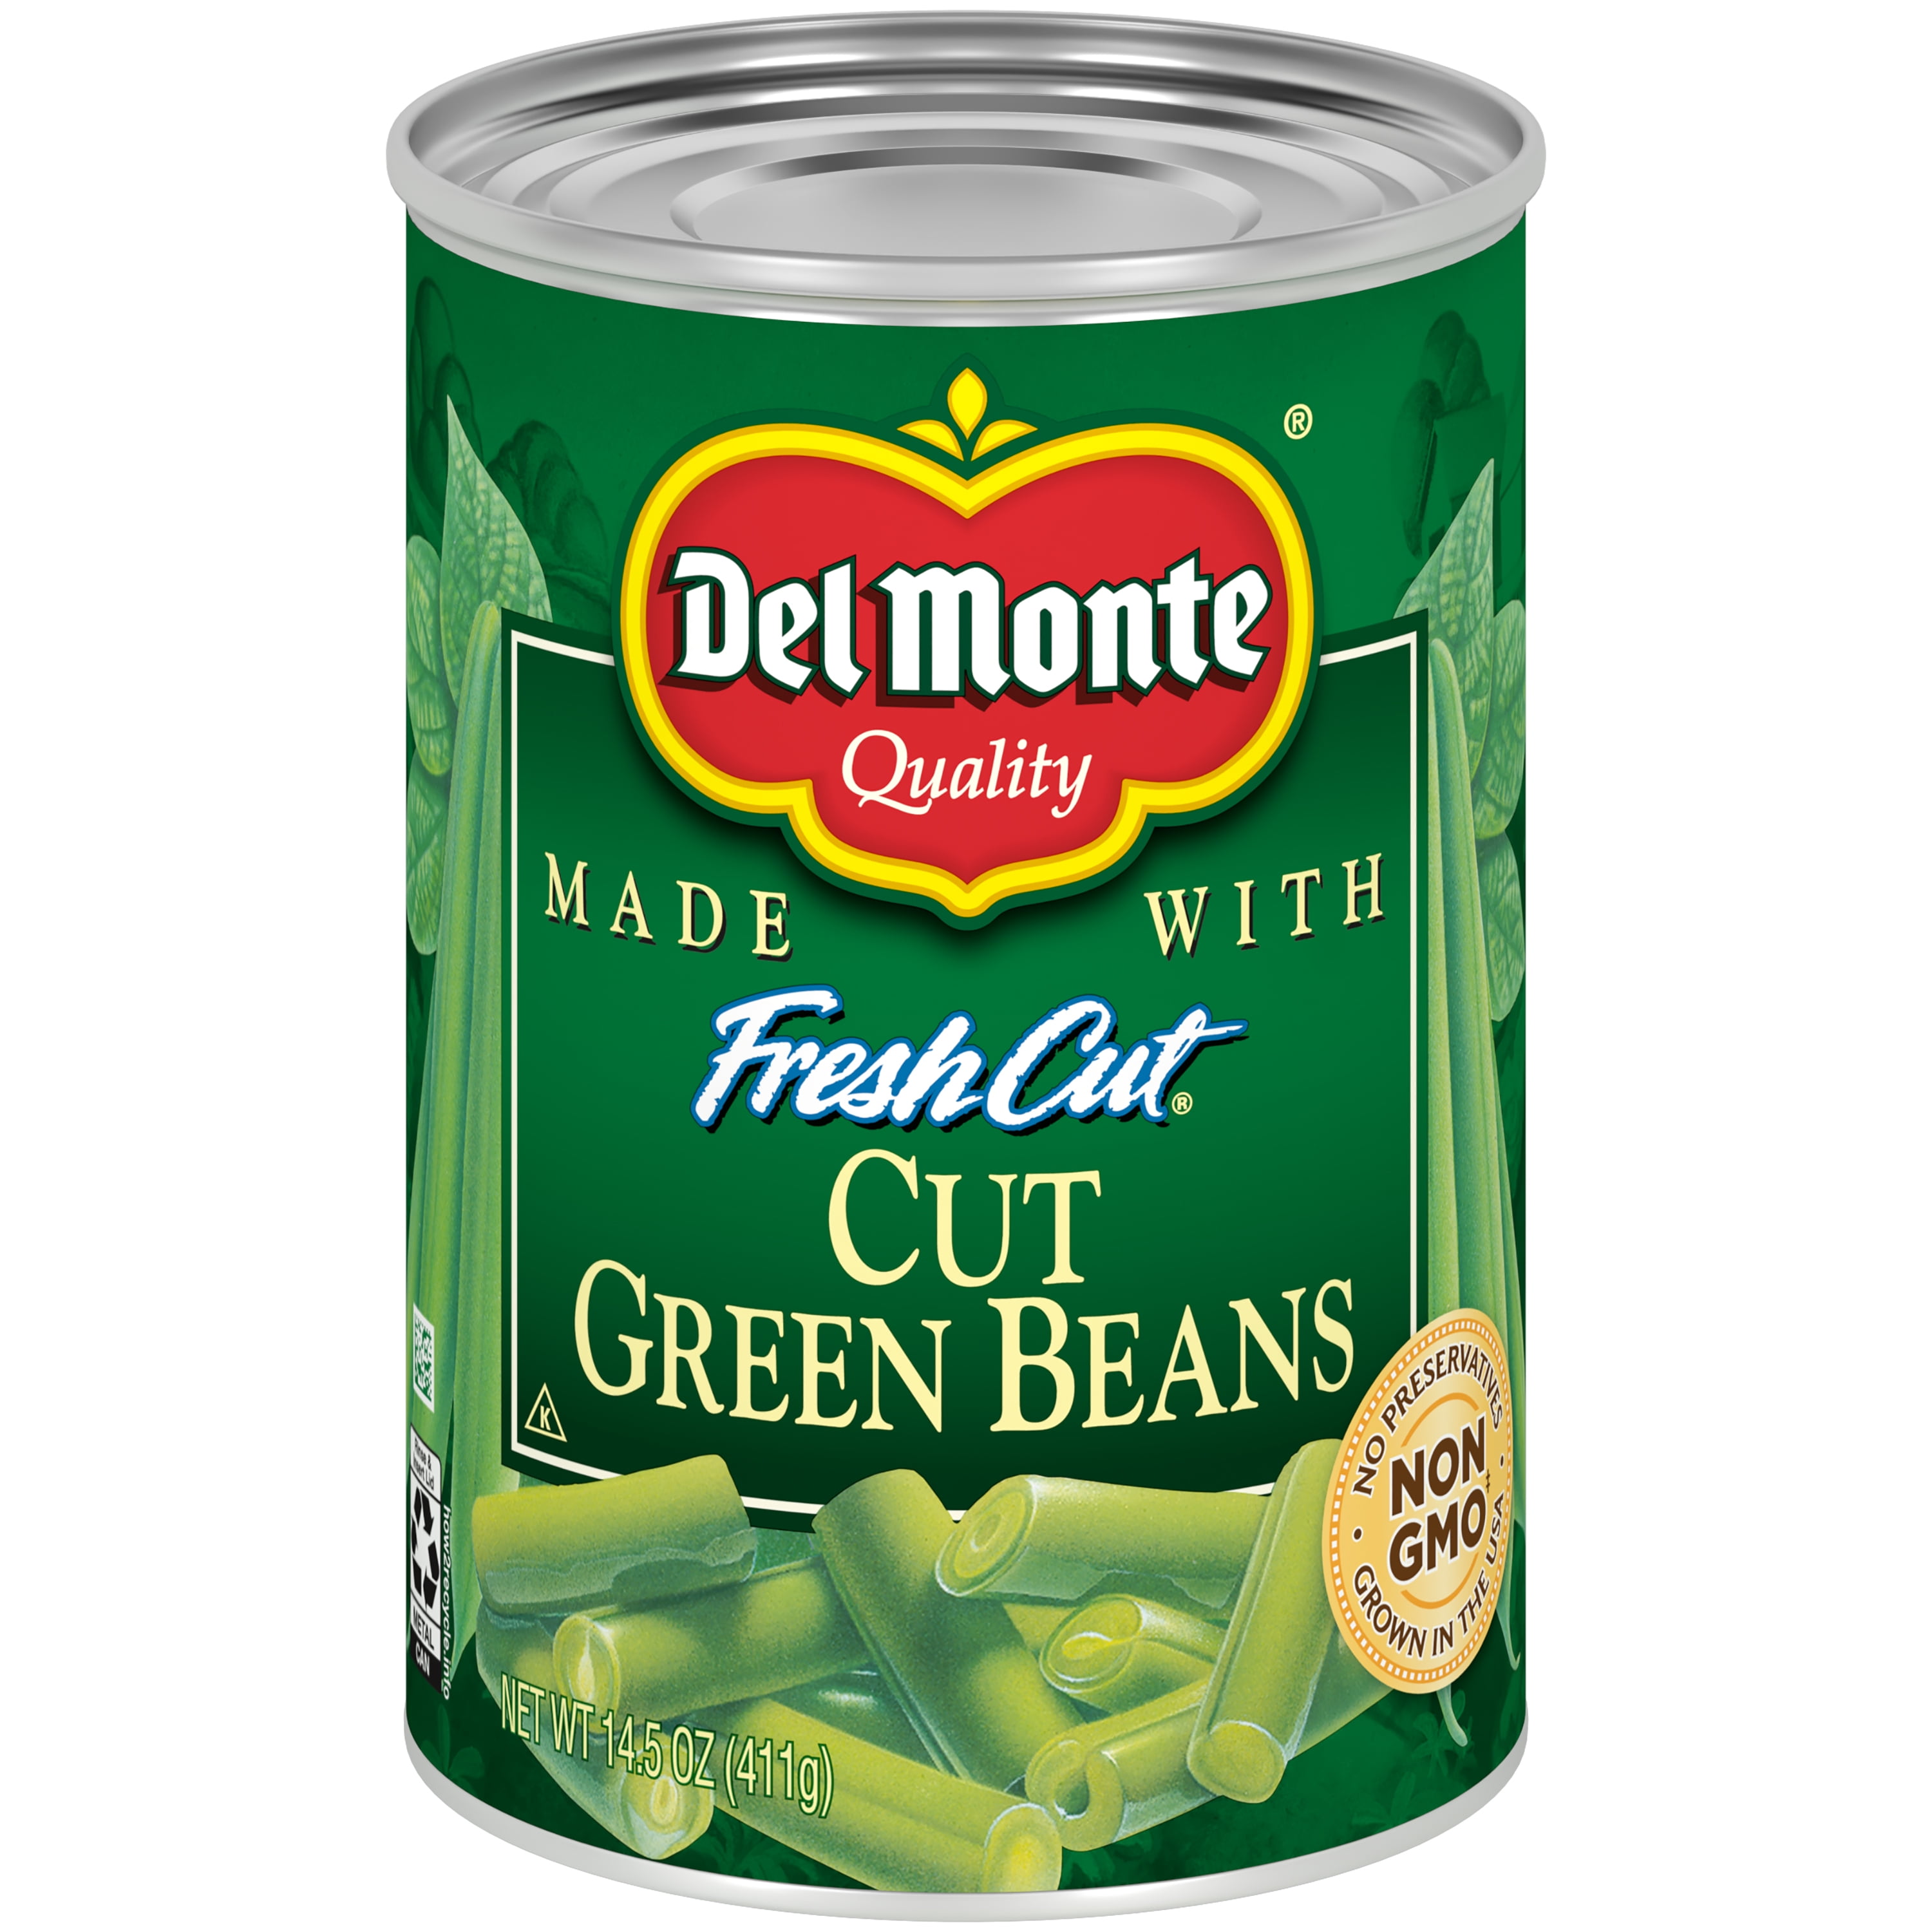 DEL MONTE Cut Green Beans Canned Vegetables, 14.5 oz Can